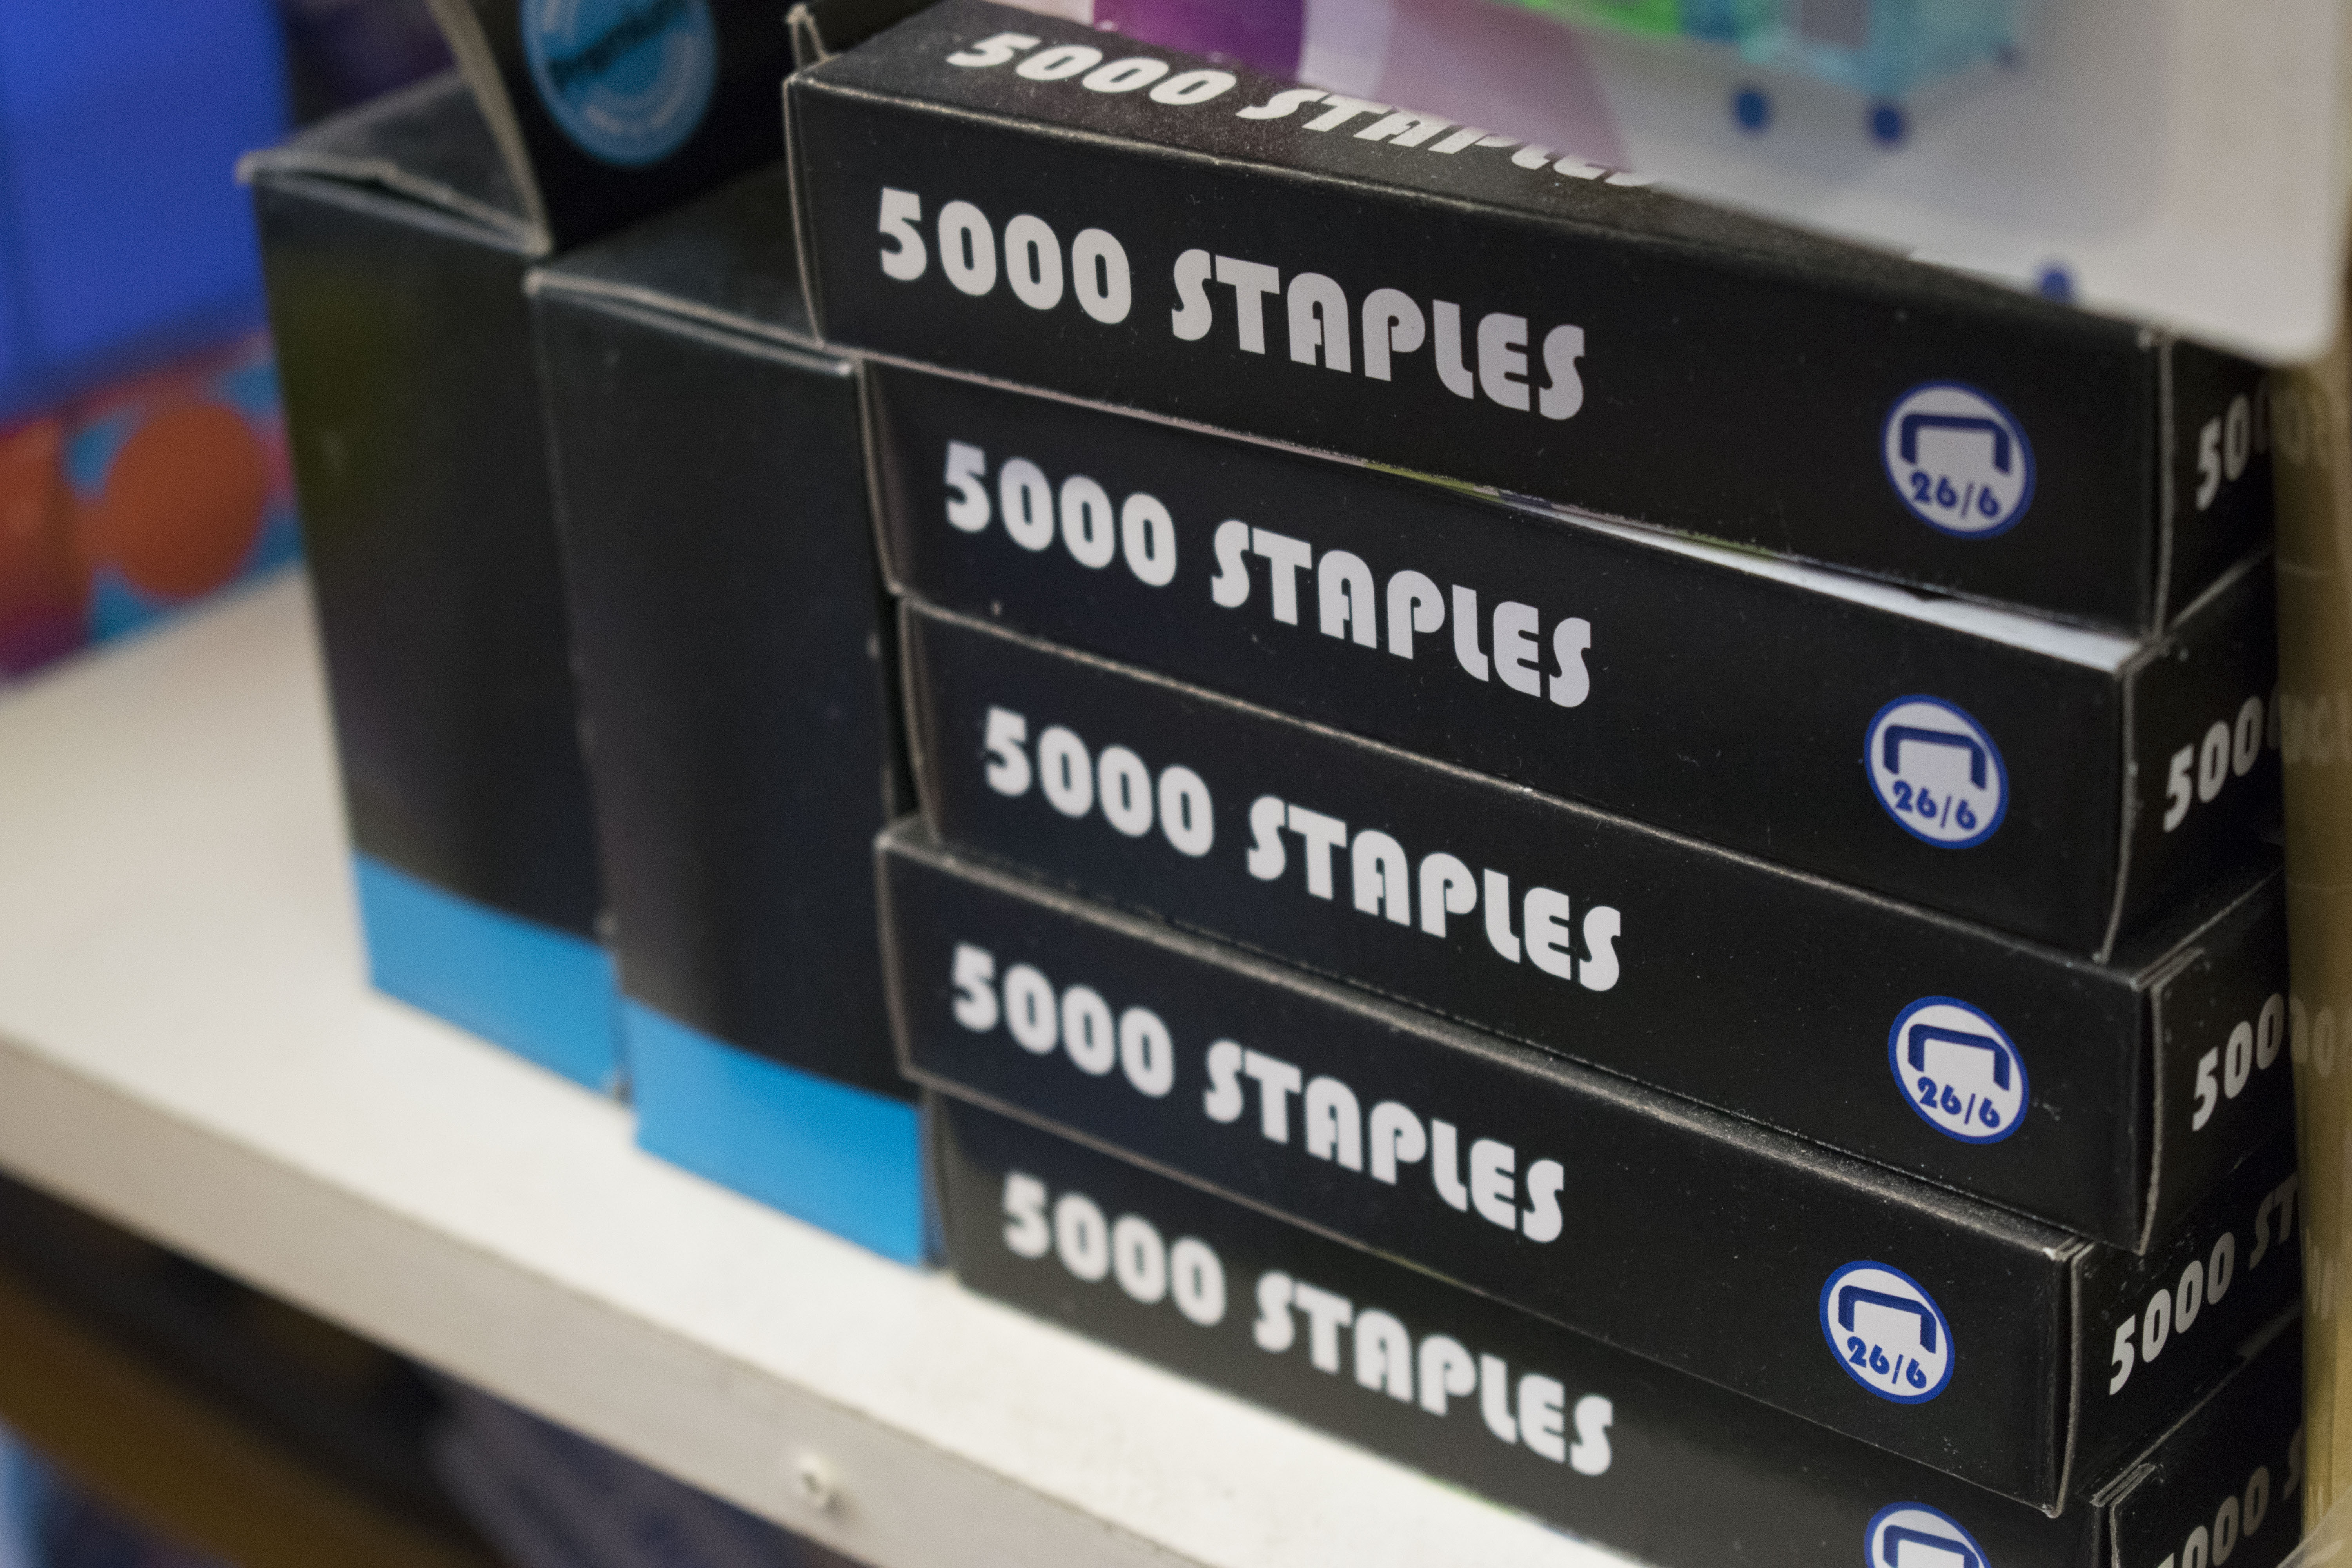 Boxes of staples